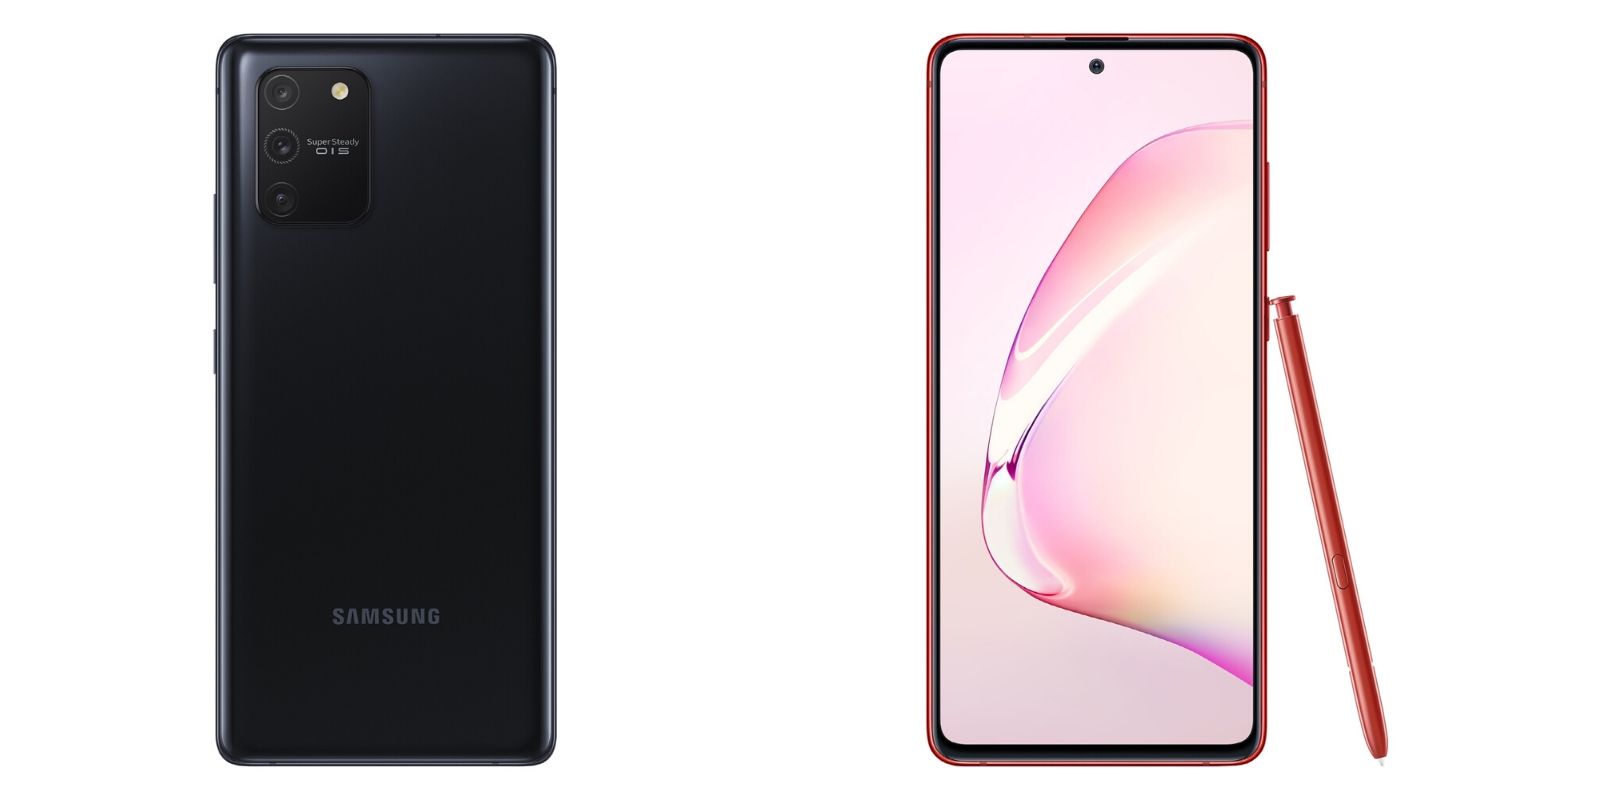 Galaxy S10 lite and Galaxy Note 10 lite